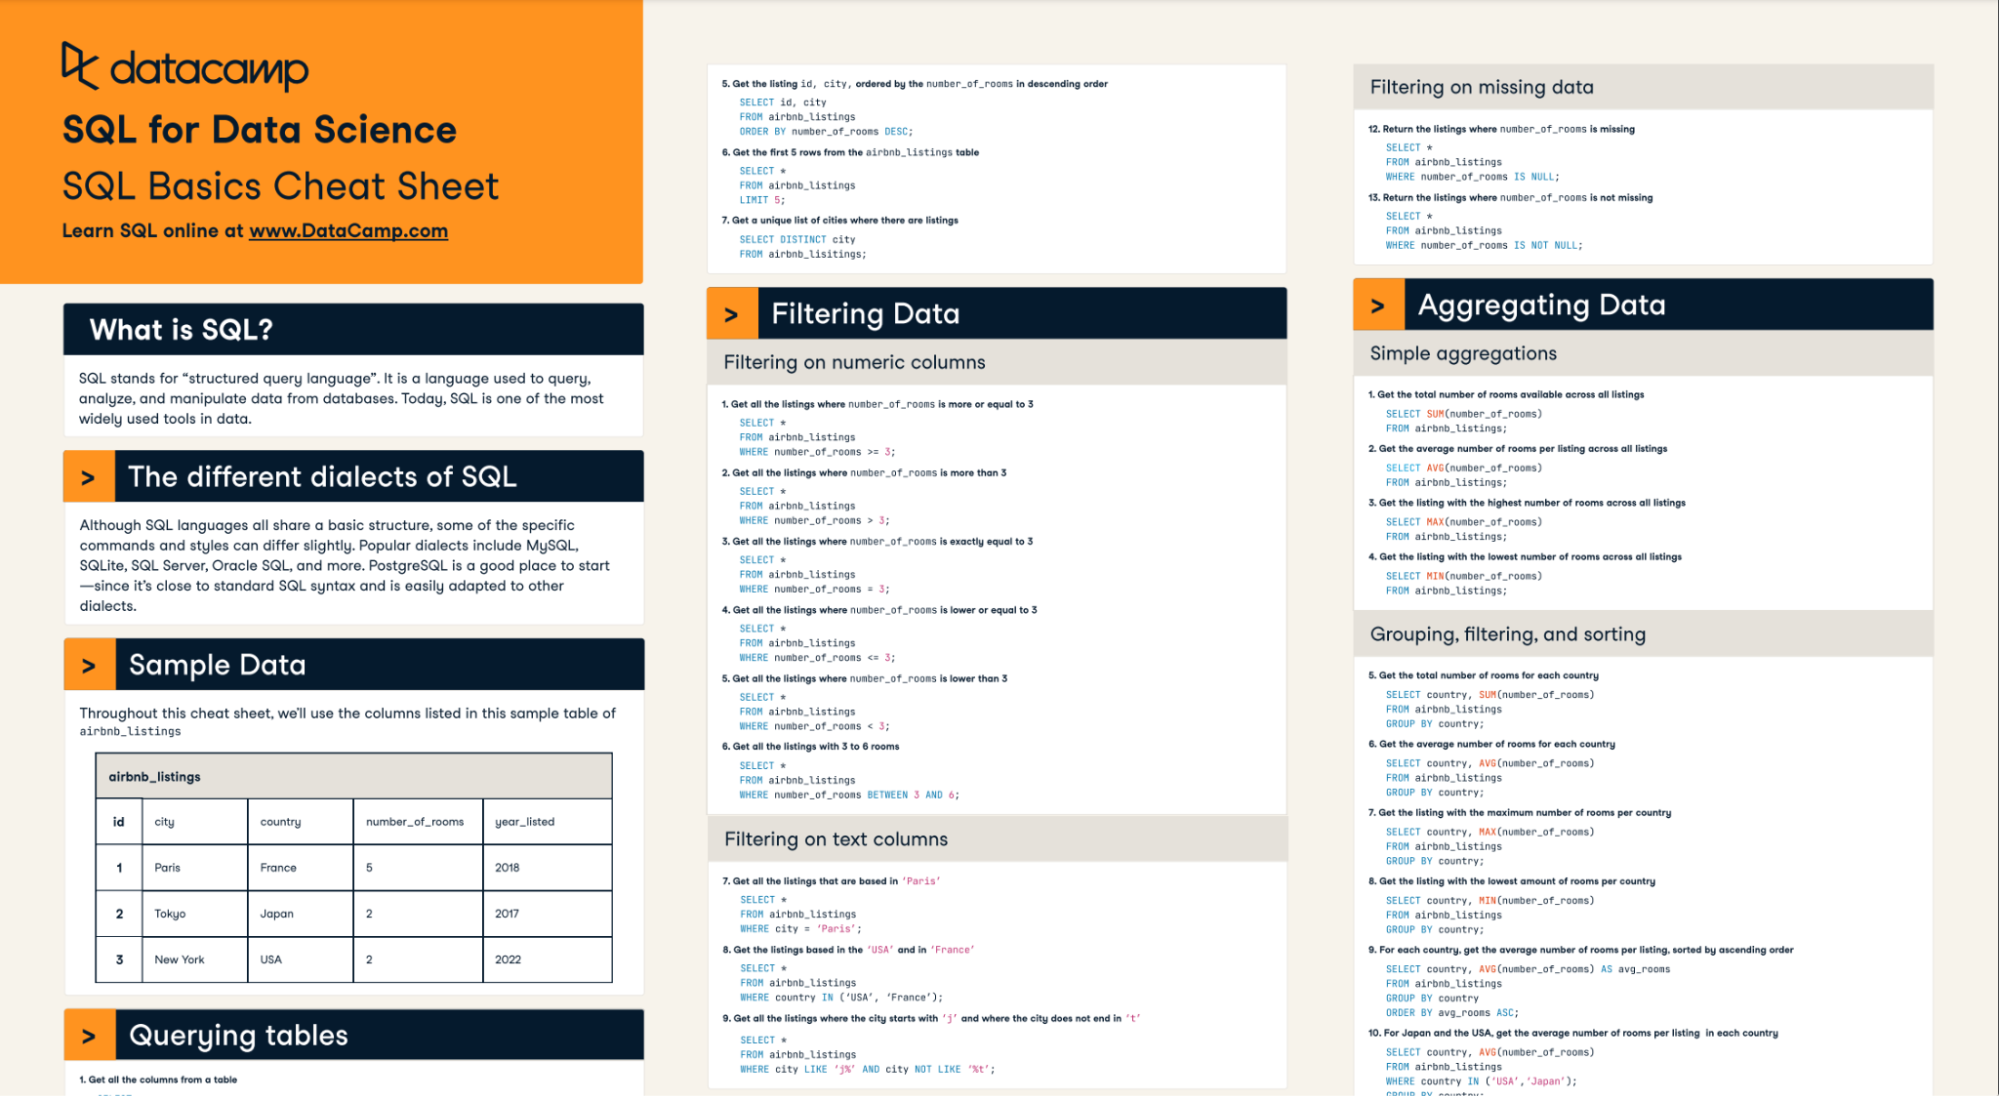 A look at our our SQL Basics Cheat Sheet